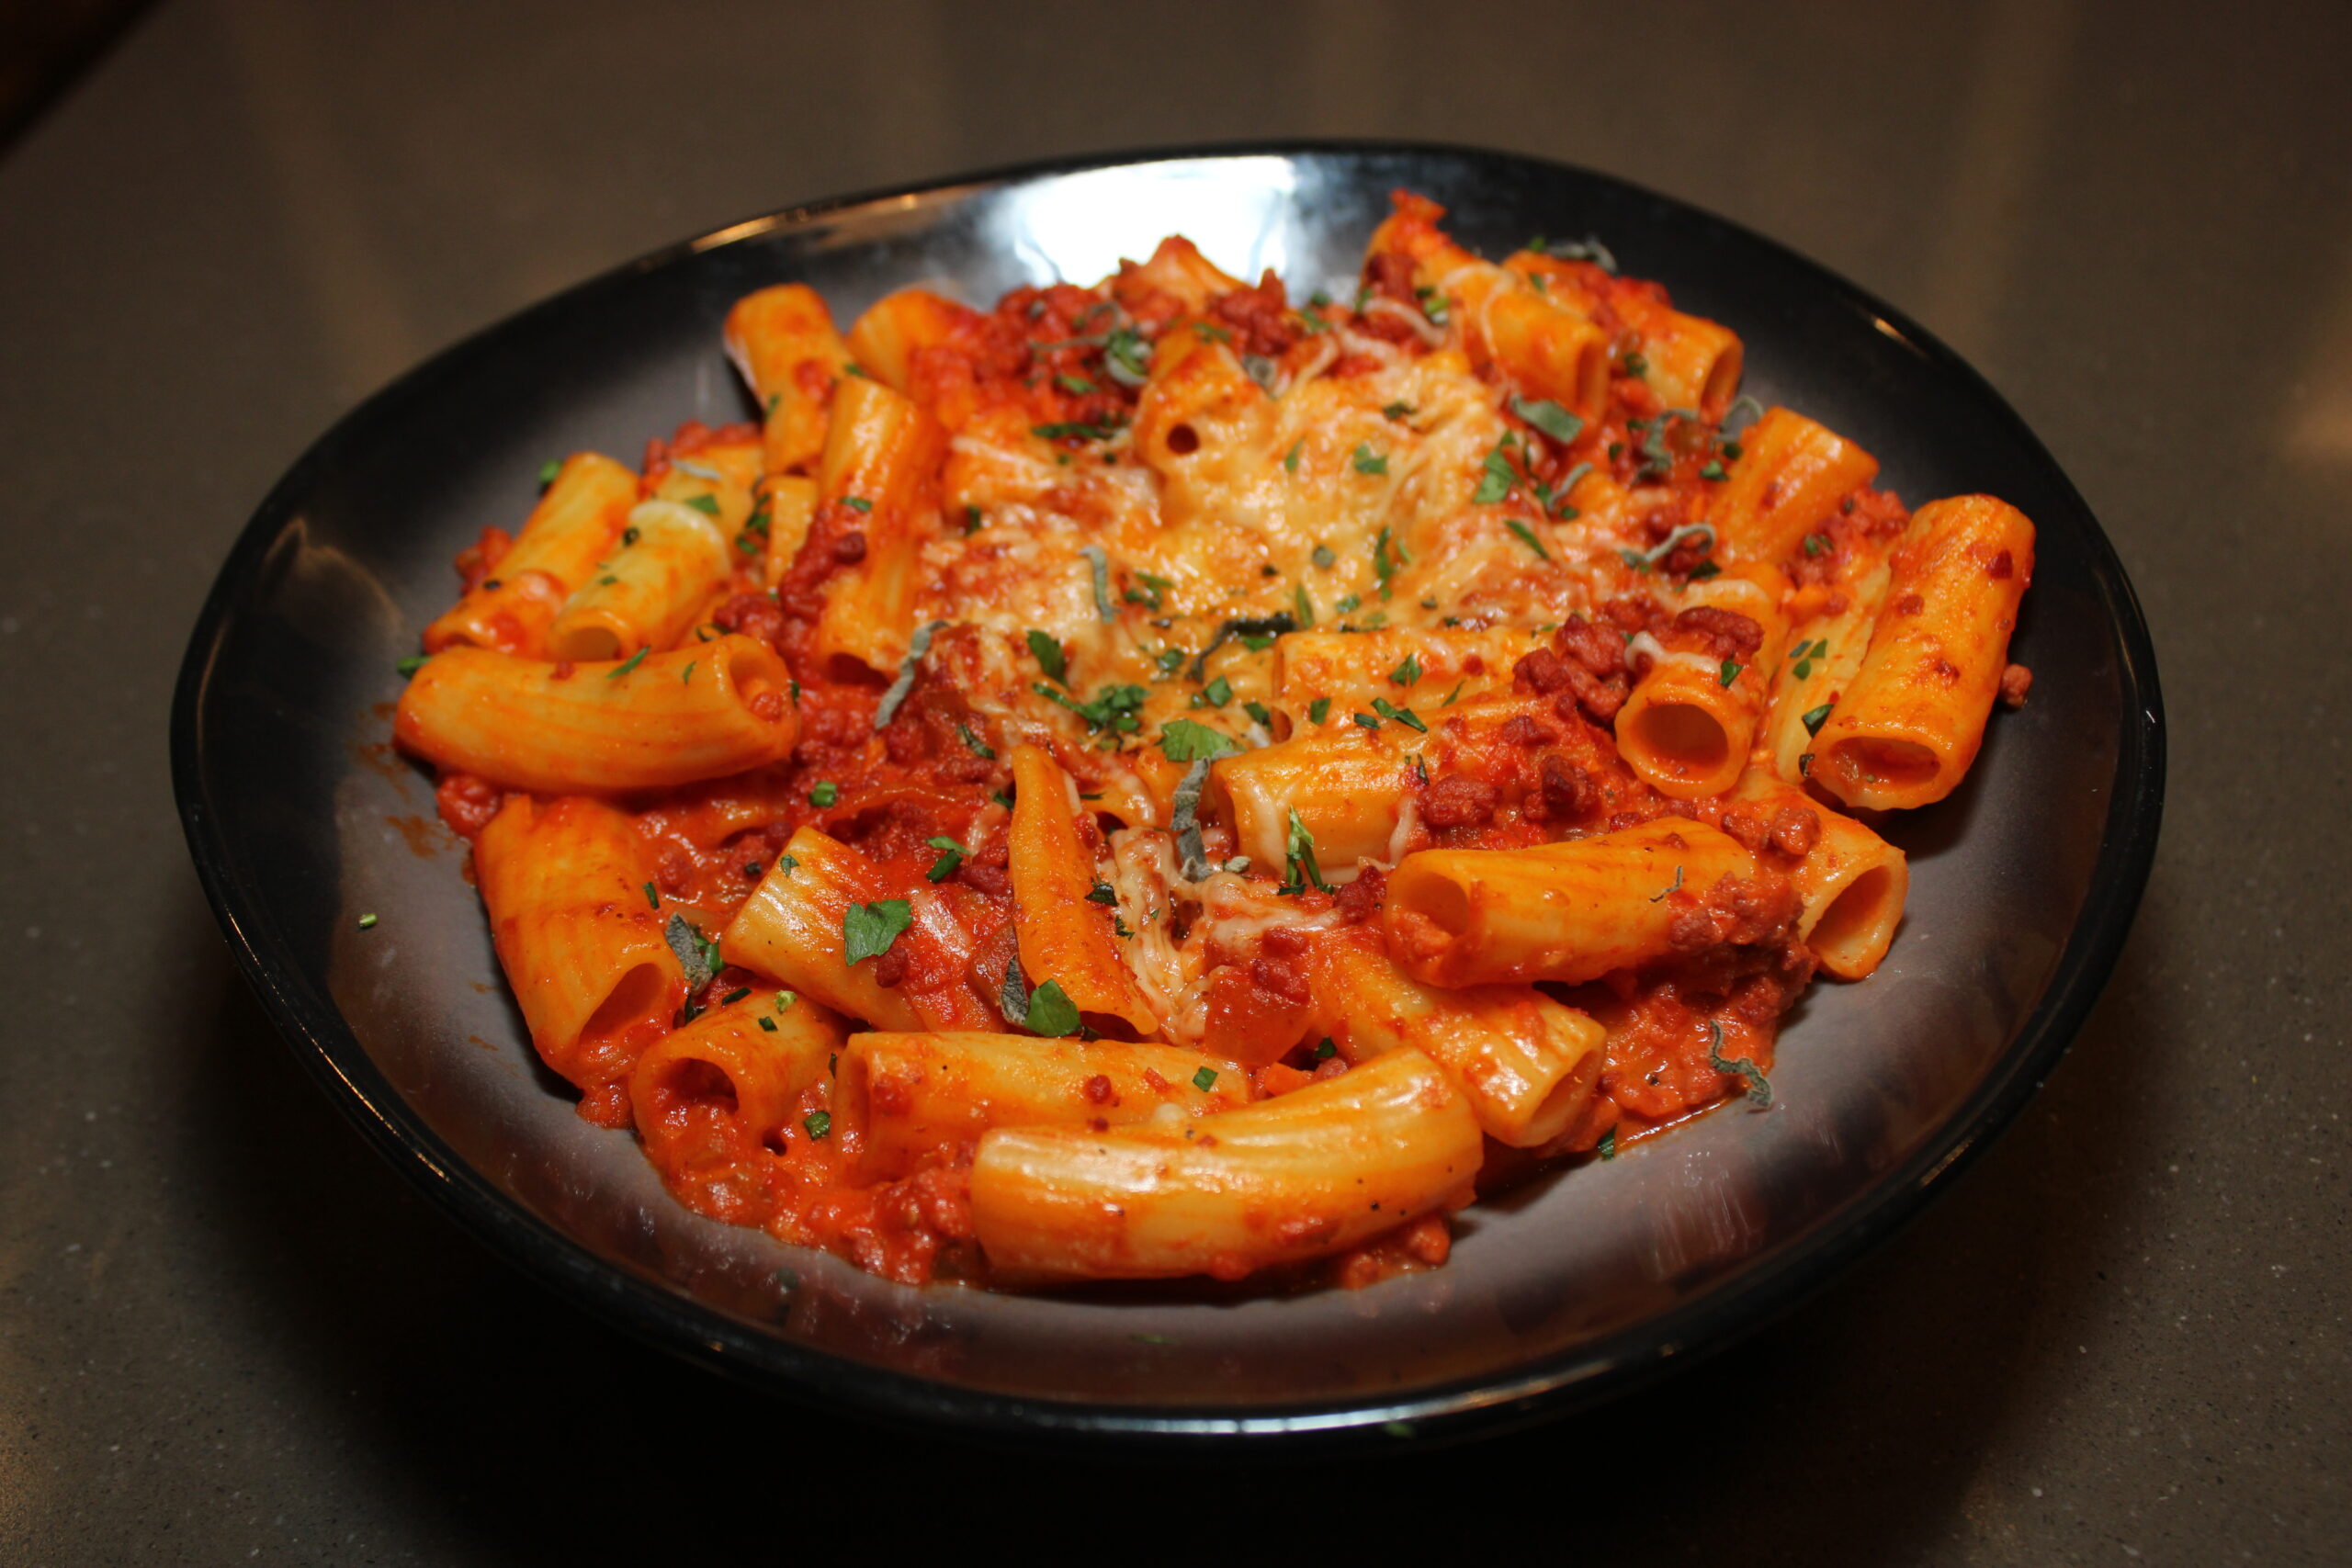 Image shows Garden Ragu dish which is a pasta with red sauce.